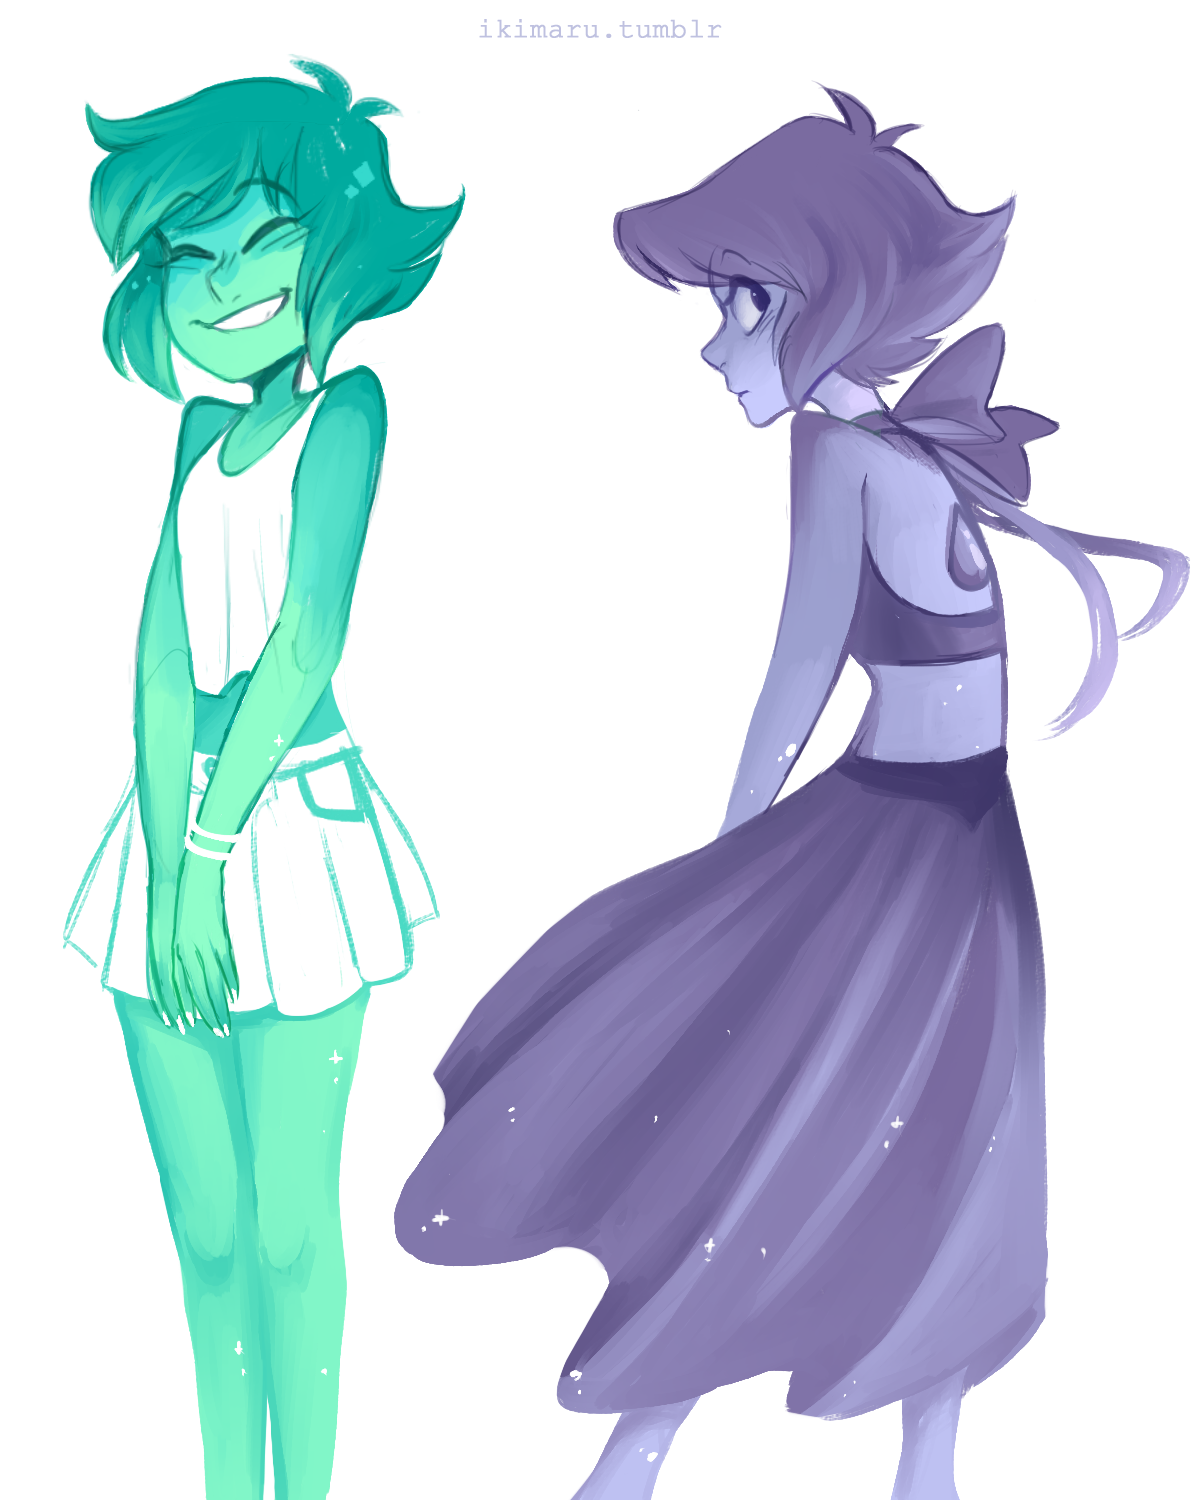 gabriel-c-media:  ikimaru:  Lapis + colors of the sea!  You have a great style! :D.